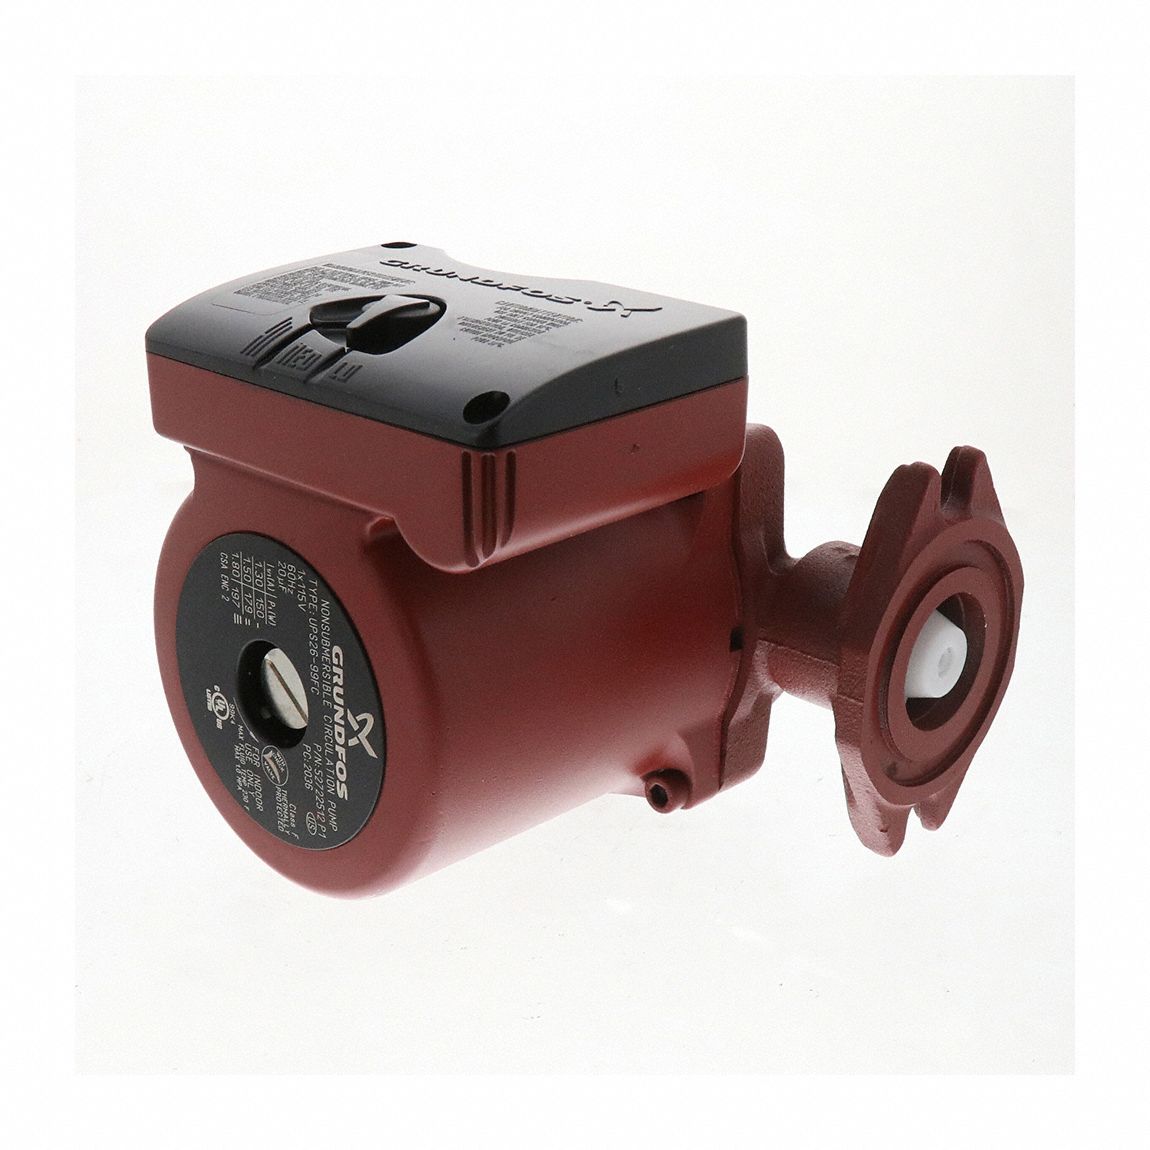 Hydronic Circulating Pump: Multi-Speed, Grundfos, Flanged, 1/6 HP, 29 ft Max. Head